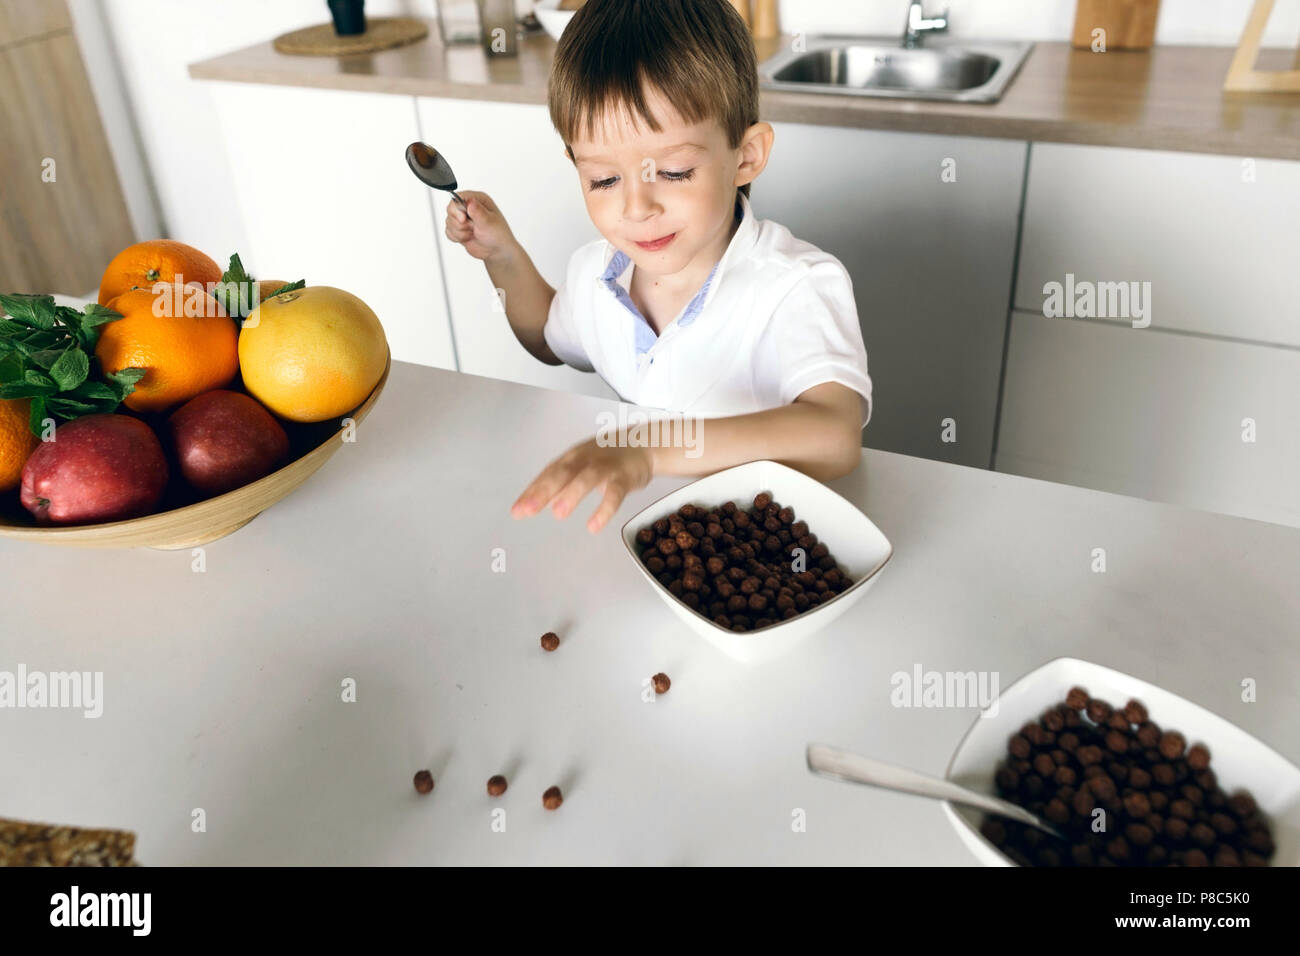 Cute little boy eating dry breakfast at home in the kitchen Stock Photo